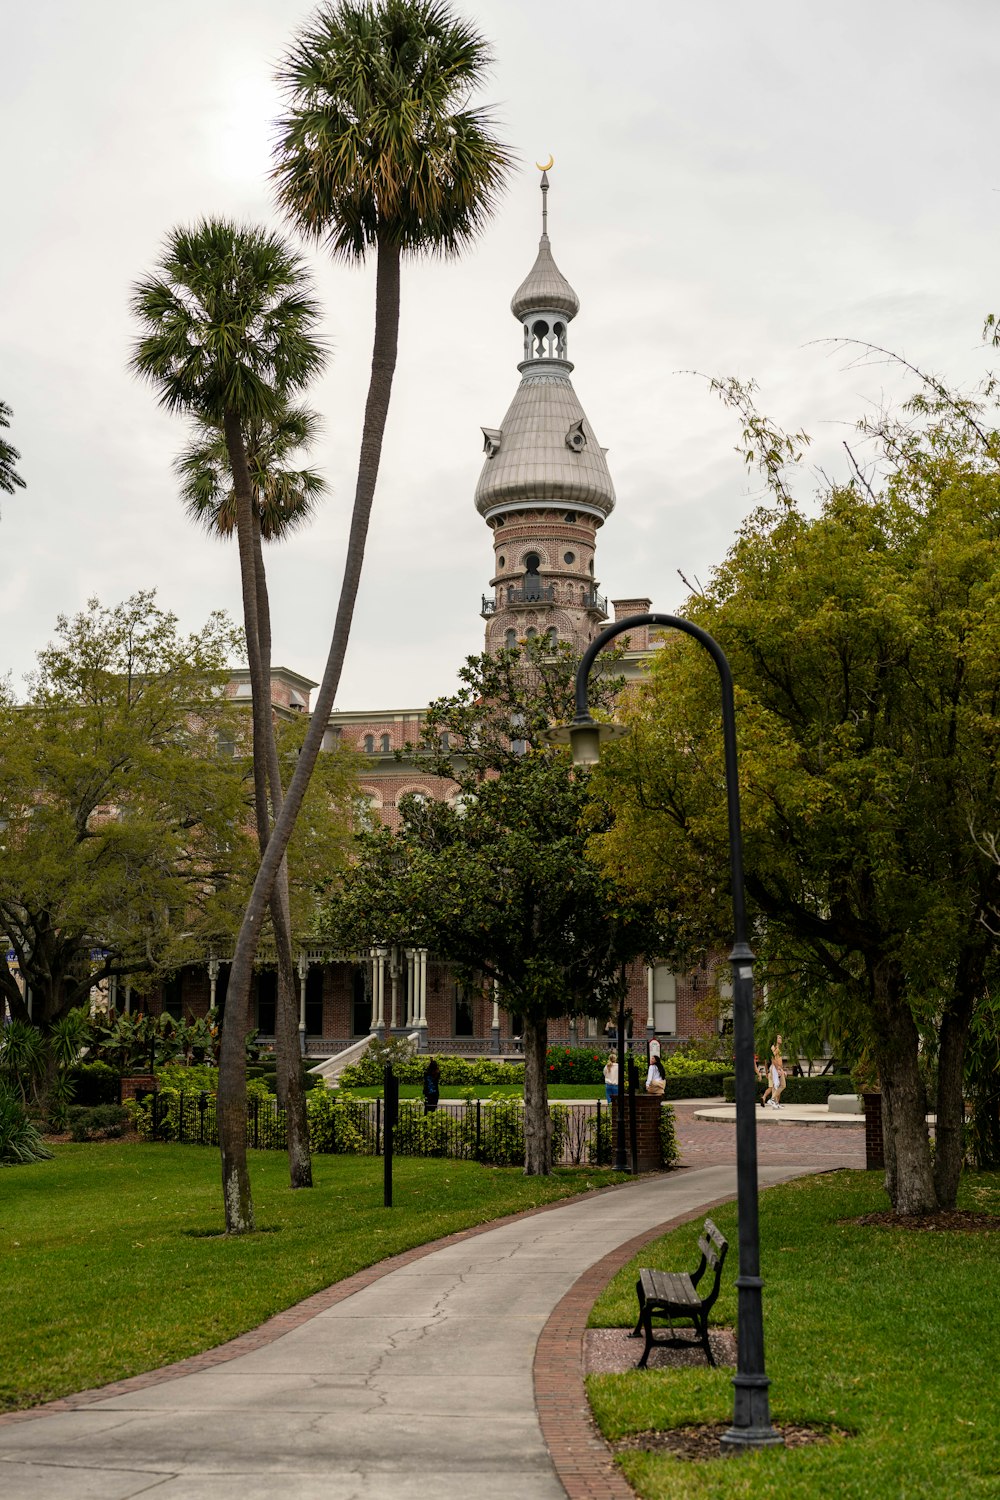 a park with palm trees and a clock tower in the background